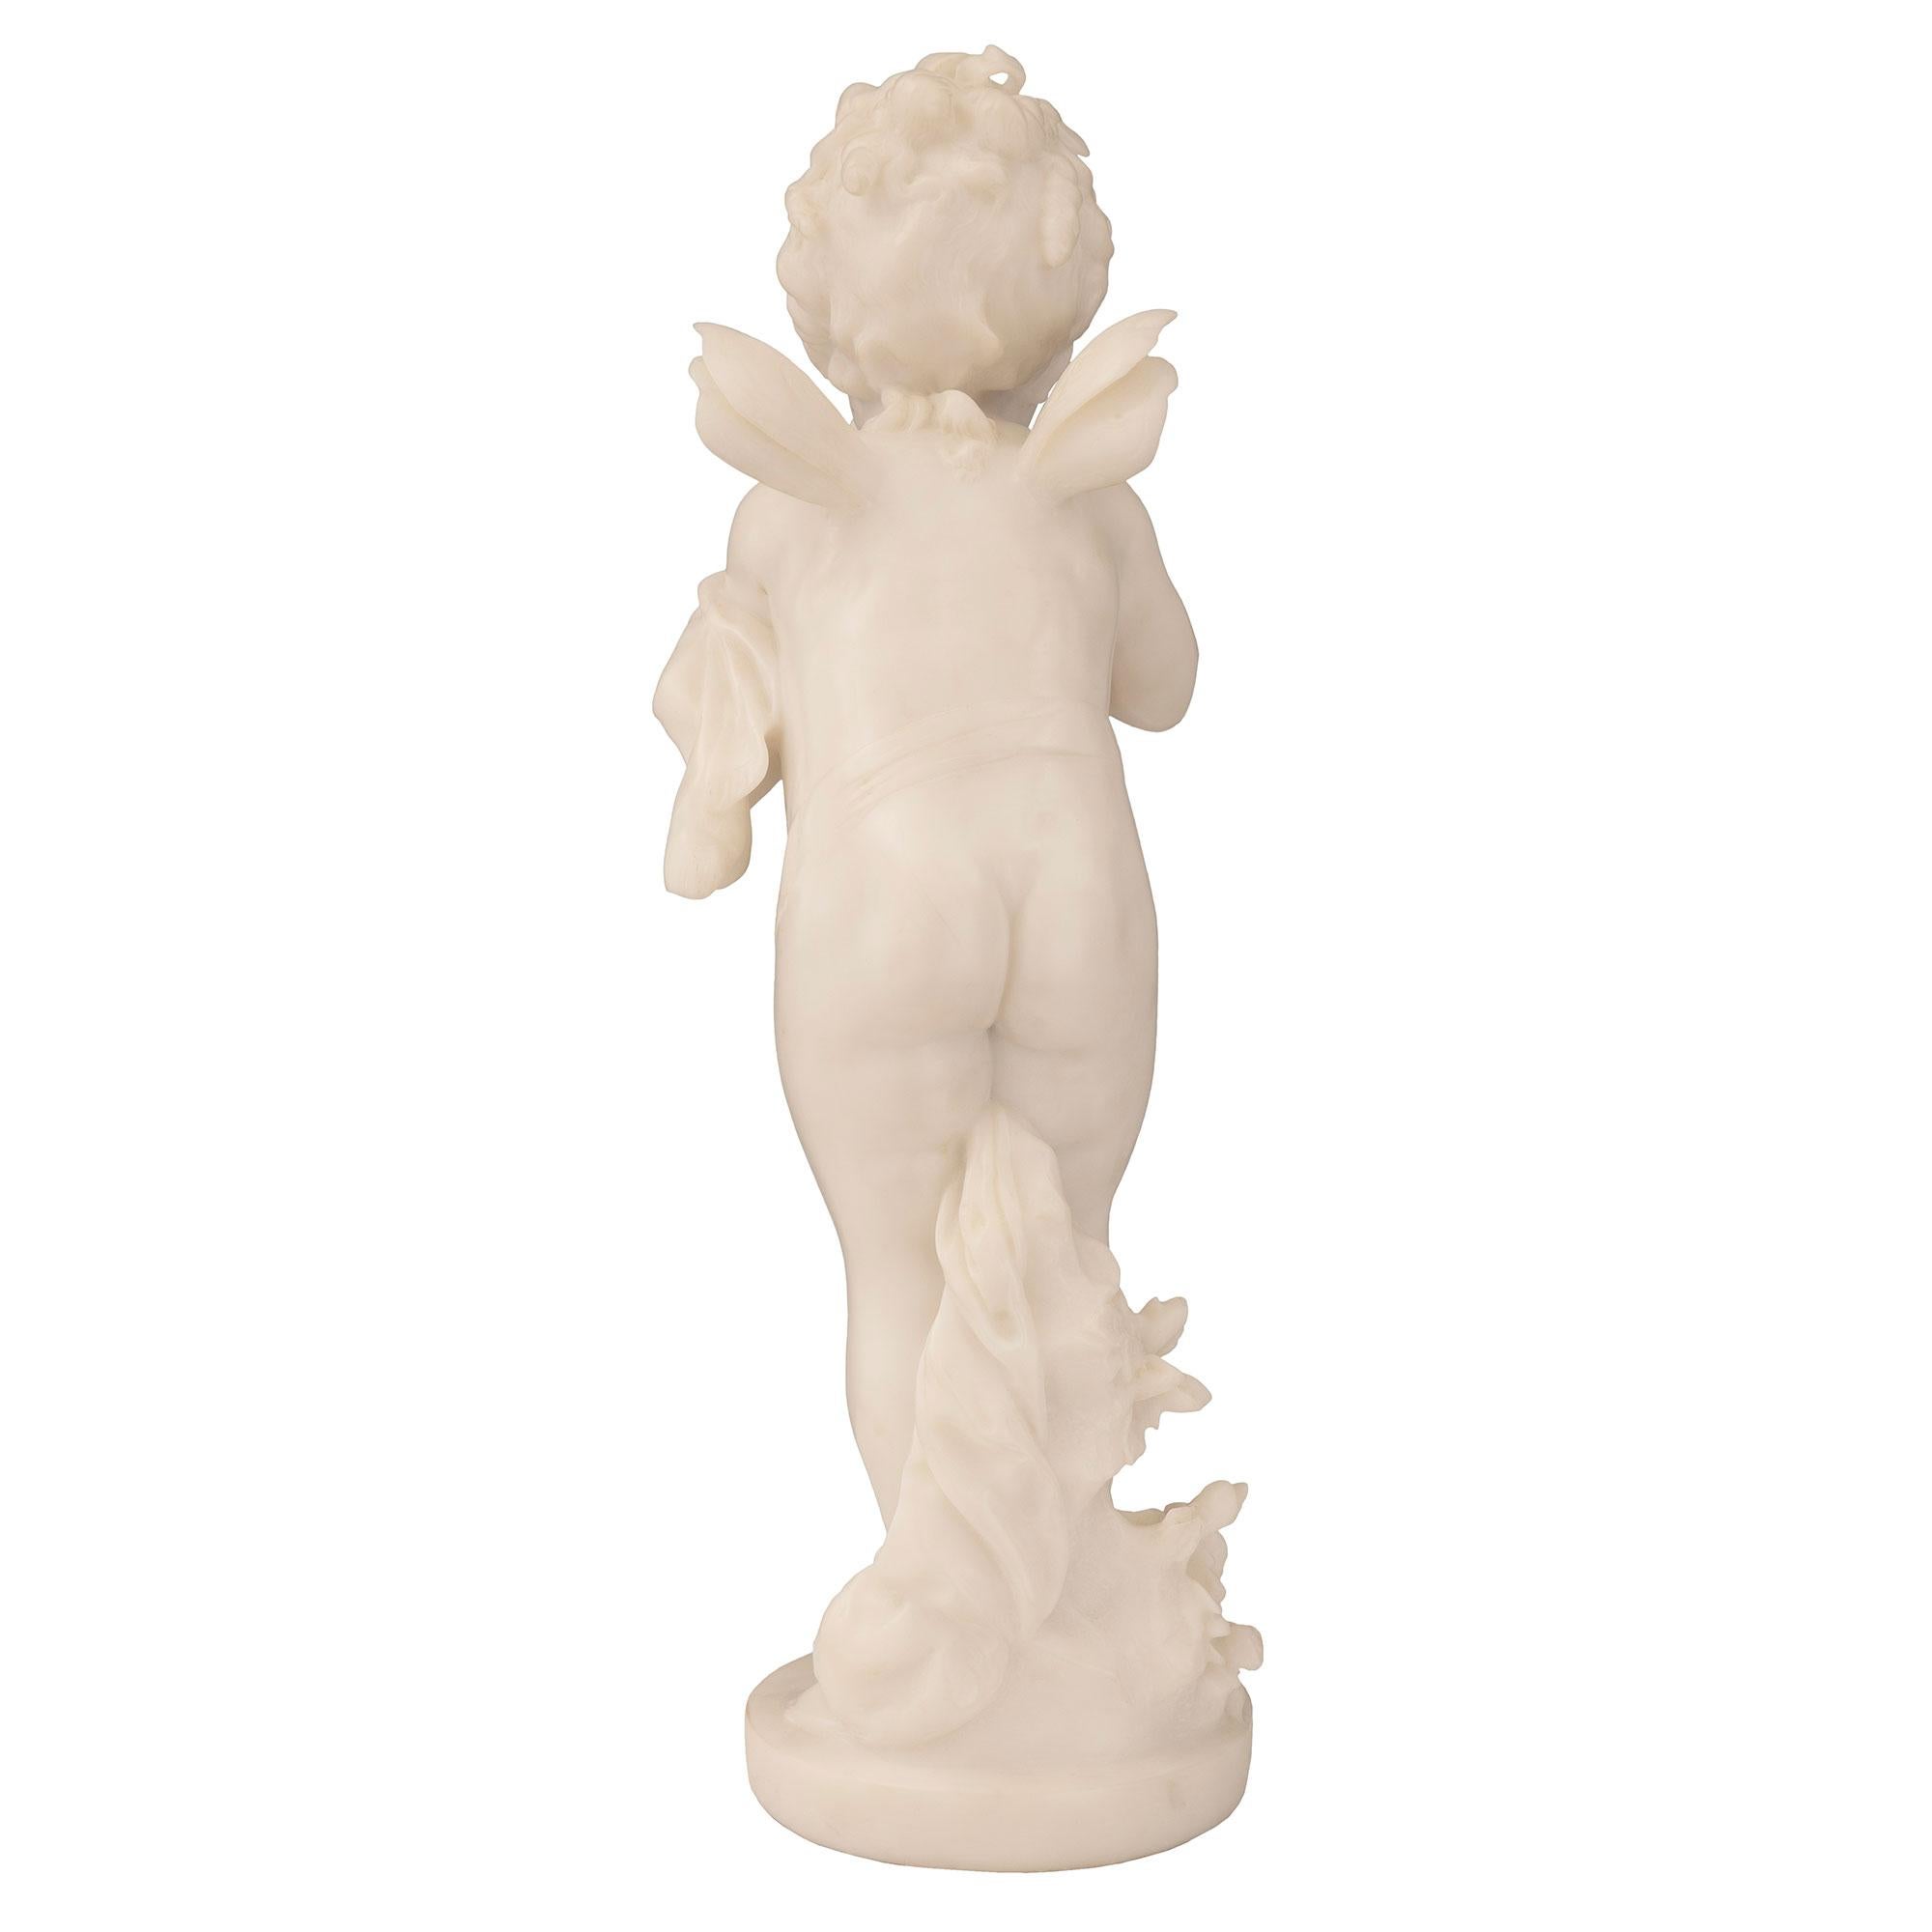 Italian Mid-19th Century White Carrara Marble Statue of Winged Girl For Sale 1